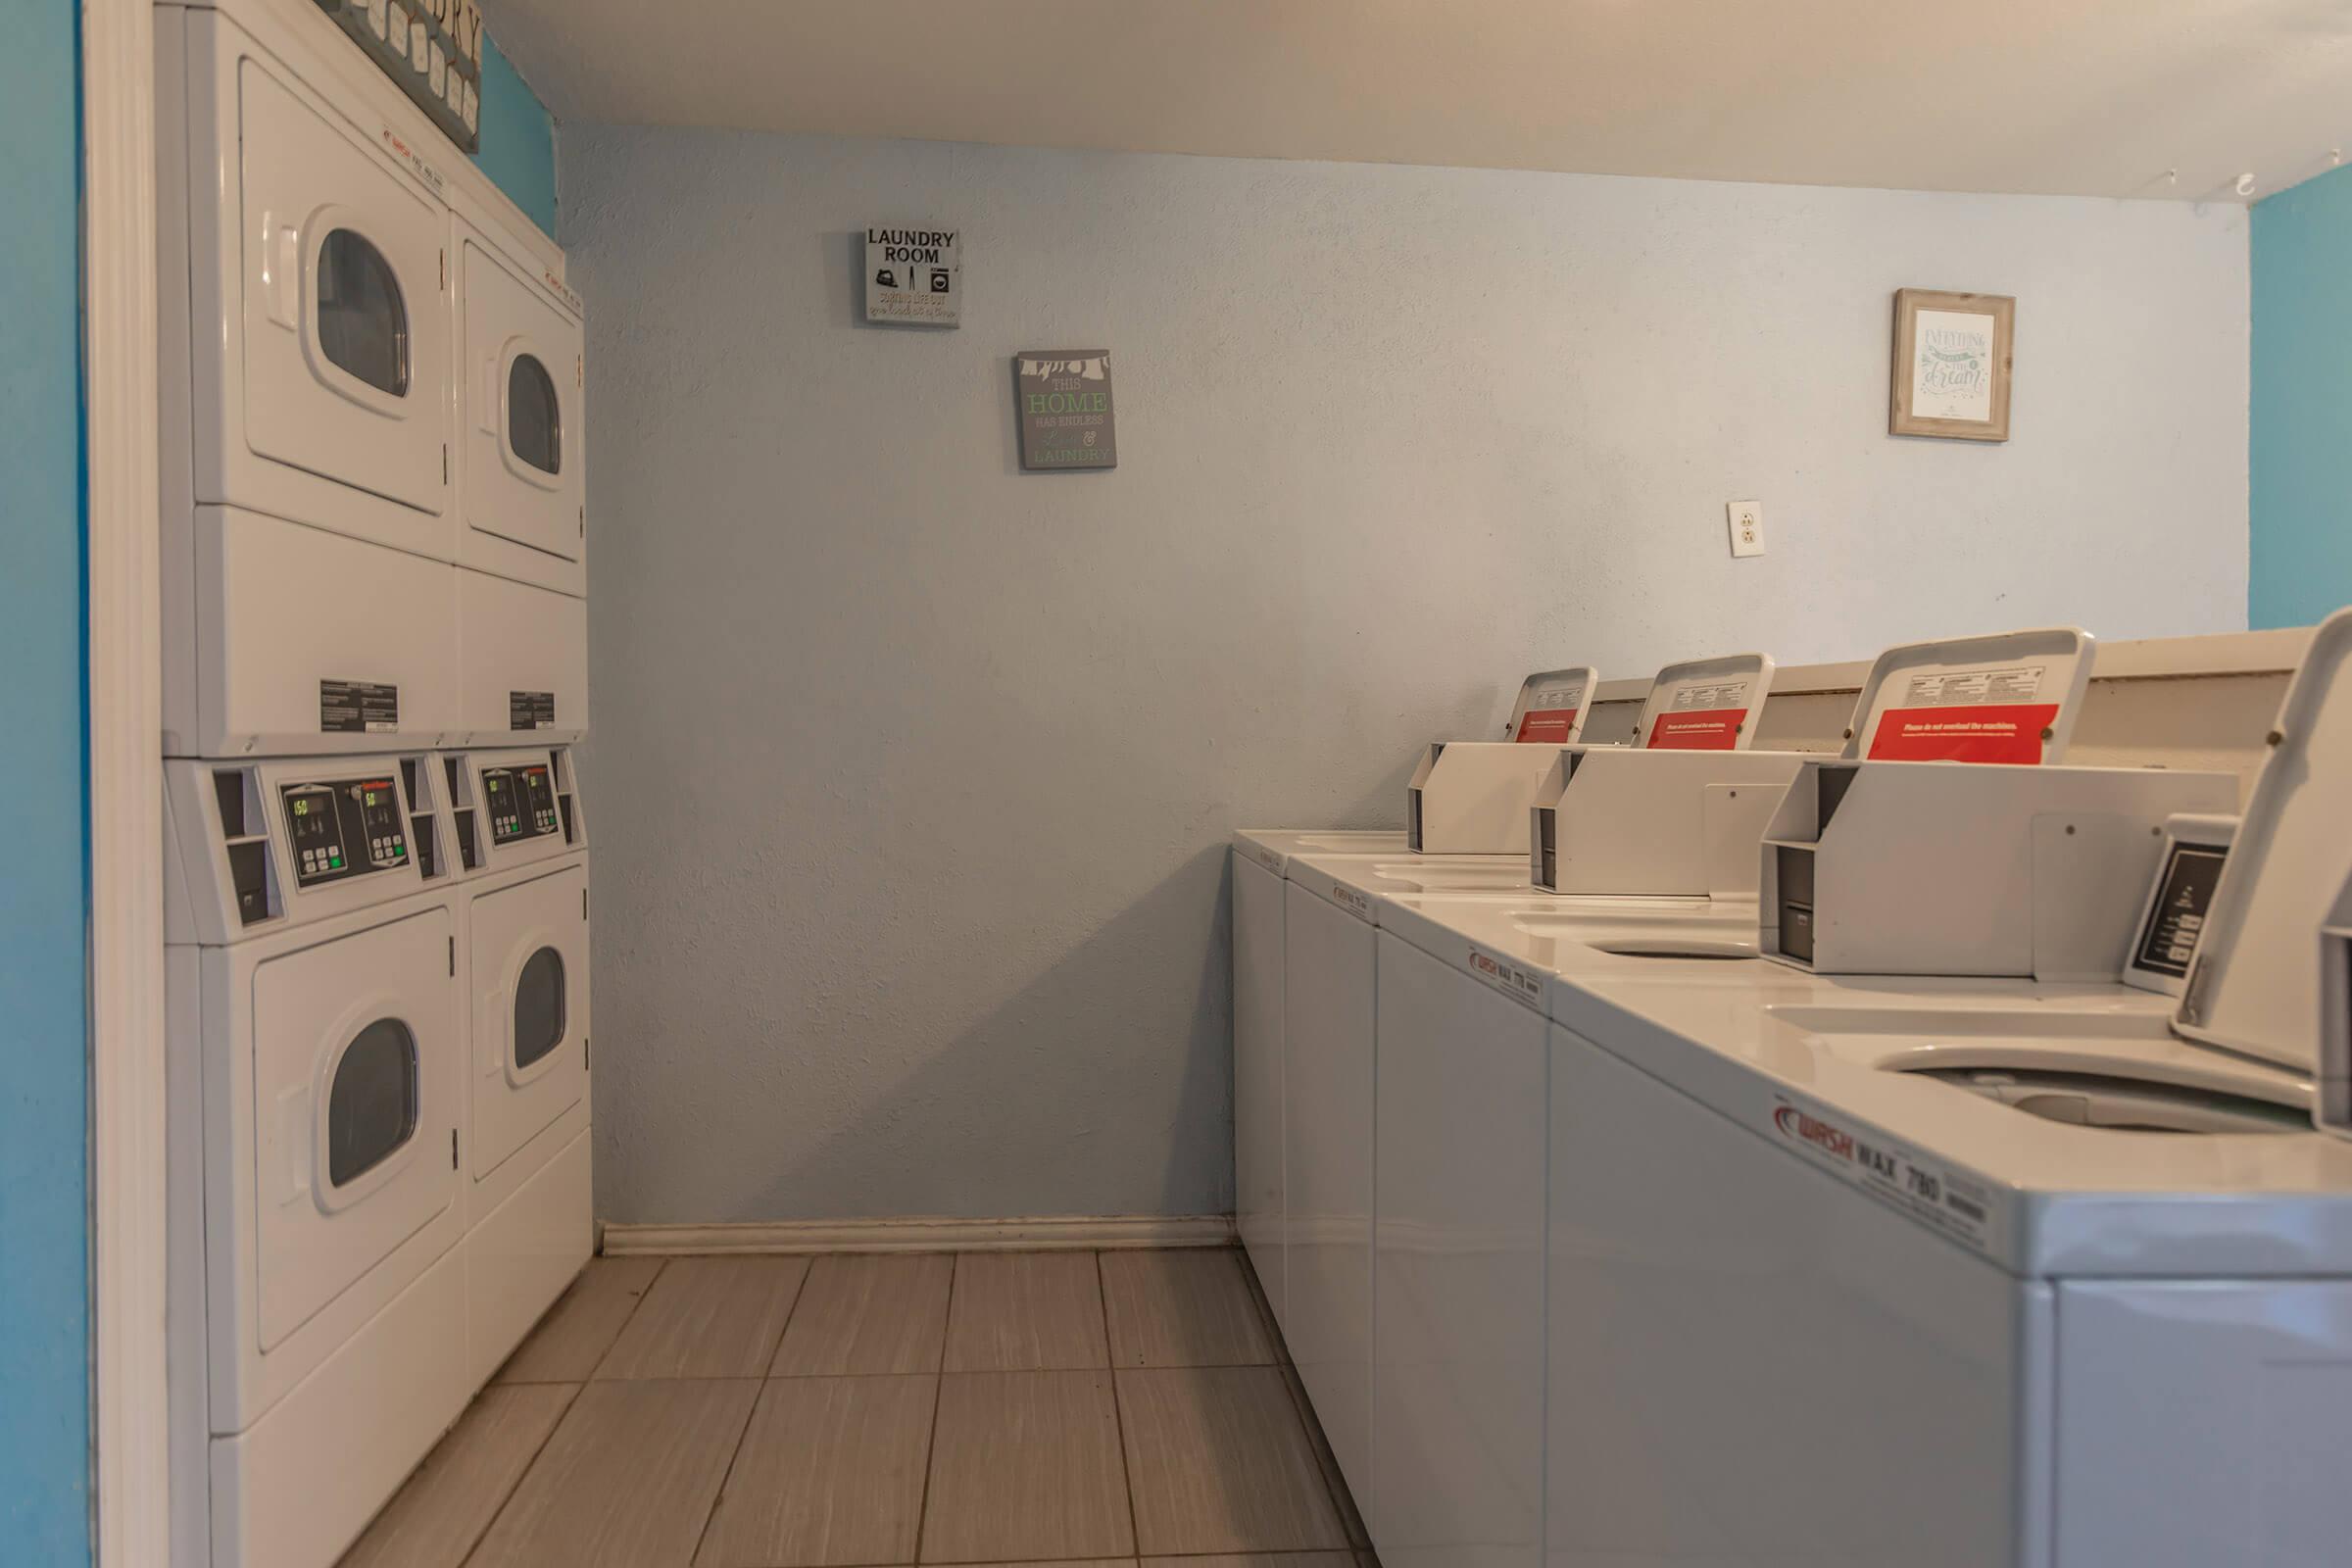 ON-SITE LAUNDRY FACILITY WITH SECURED ACCESS